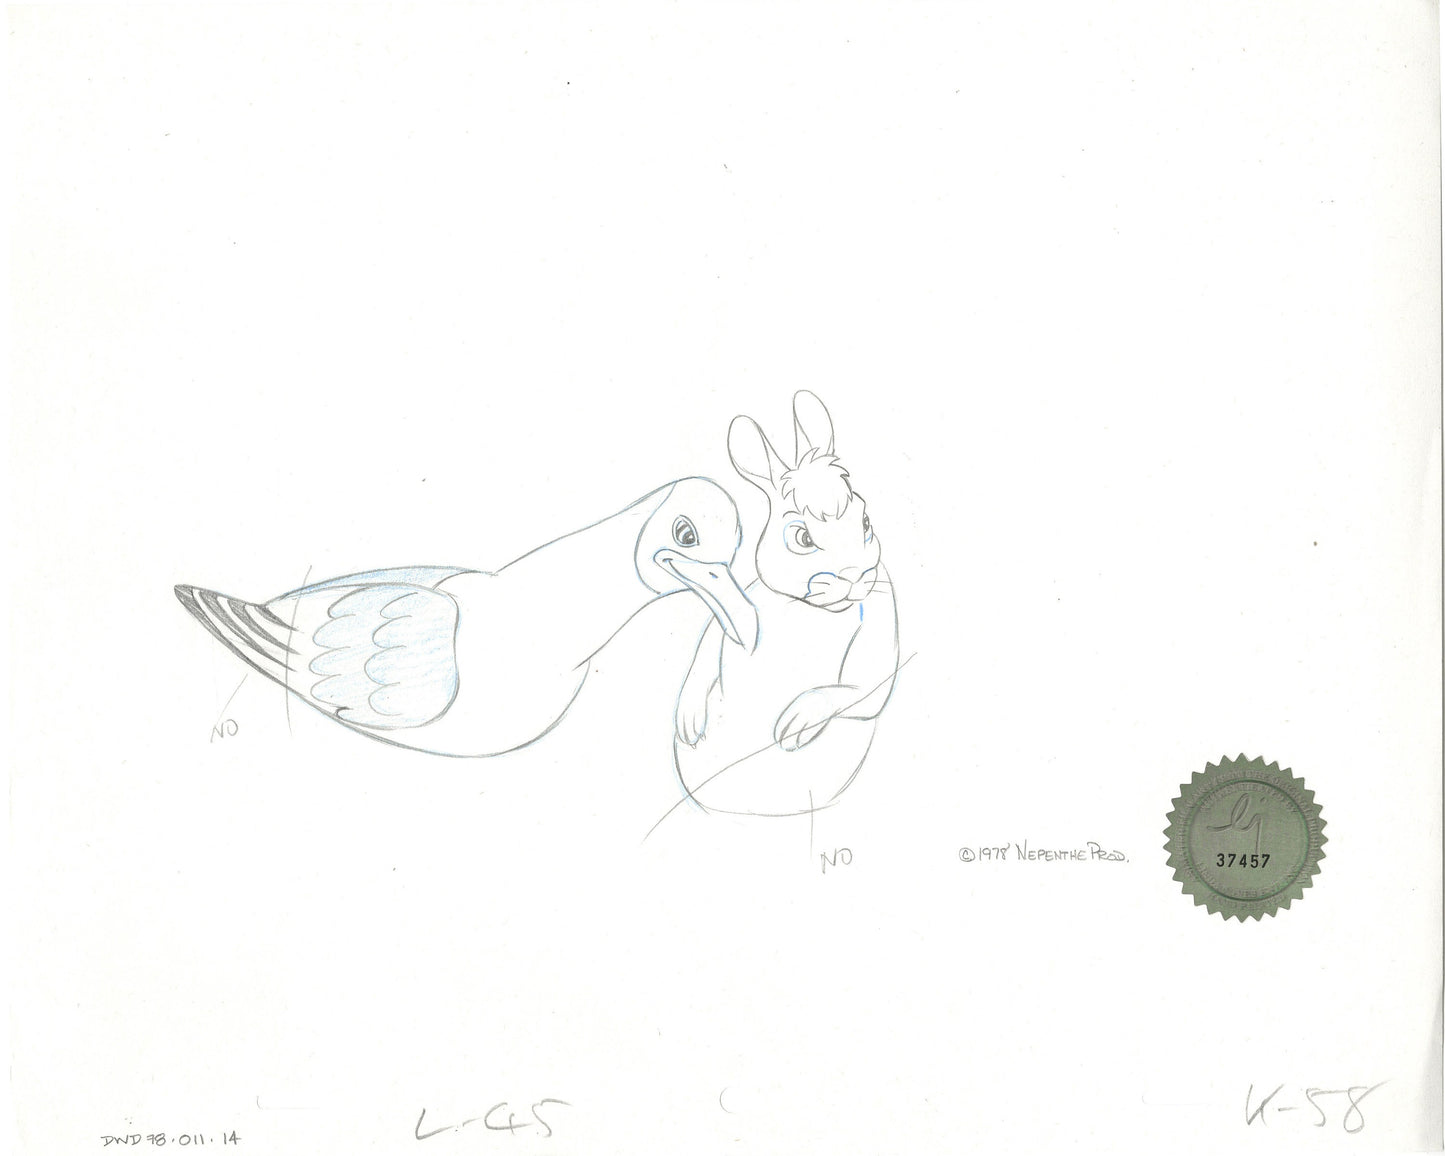 Watership Down 1978 Production Animation Cel Drawing of Bigwig and Kehaar with Linda Jones Seal and Certificate of Authenticity 011-014